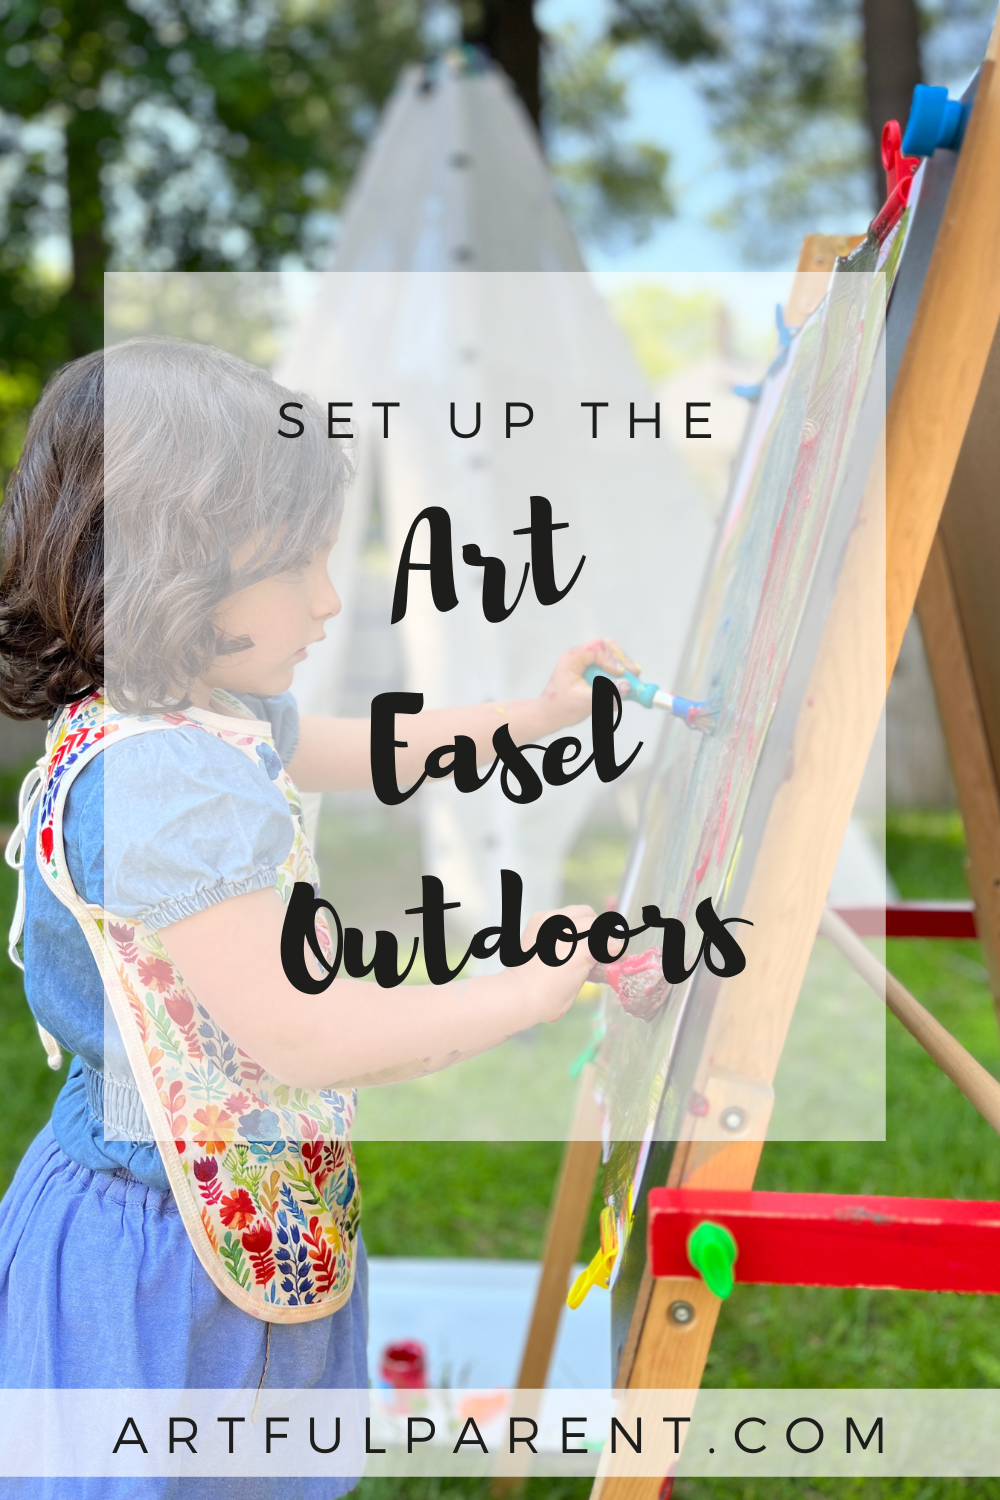 Painting with a Kids Art Easel Outdoors